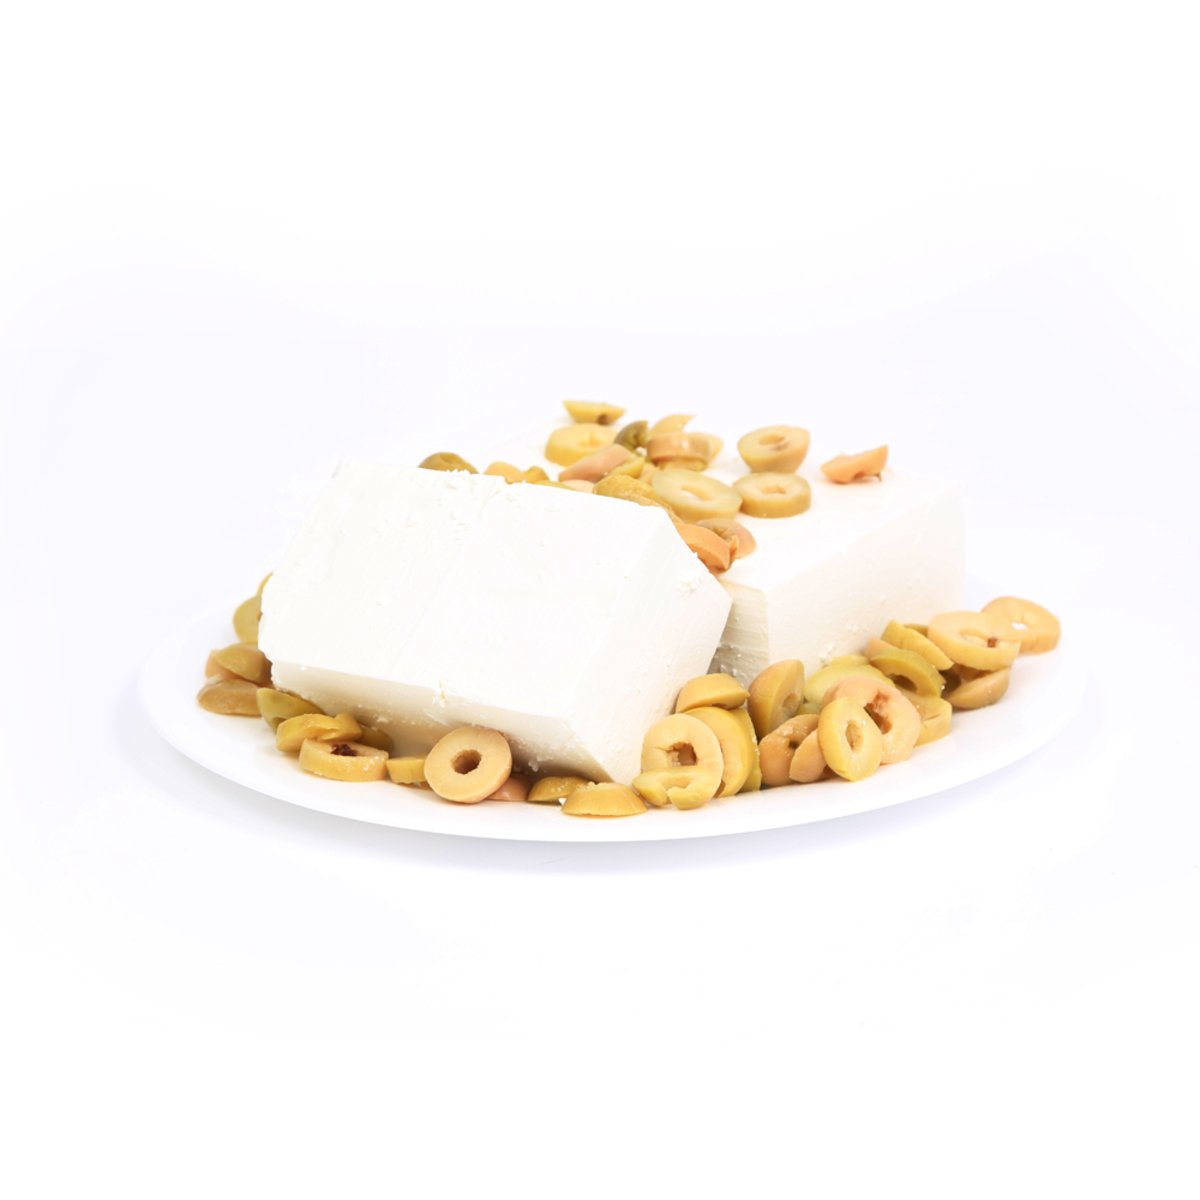 Buy Egyptian Feta Cheese With Olives 450 g Online at Best Price | White Cheese | Lulu KSA in Saudi Arabia